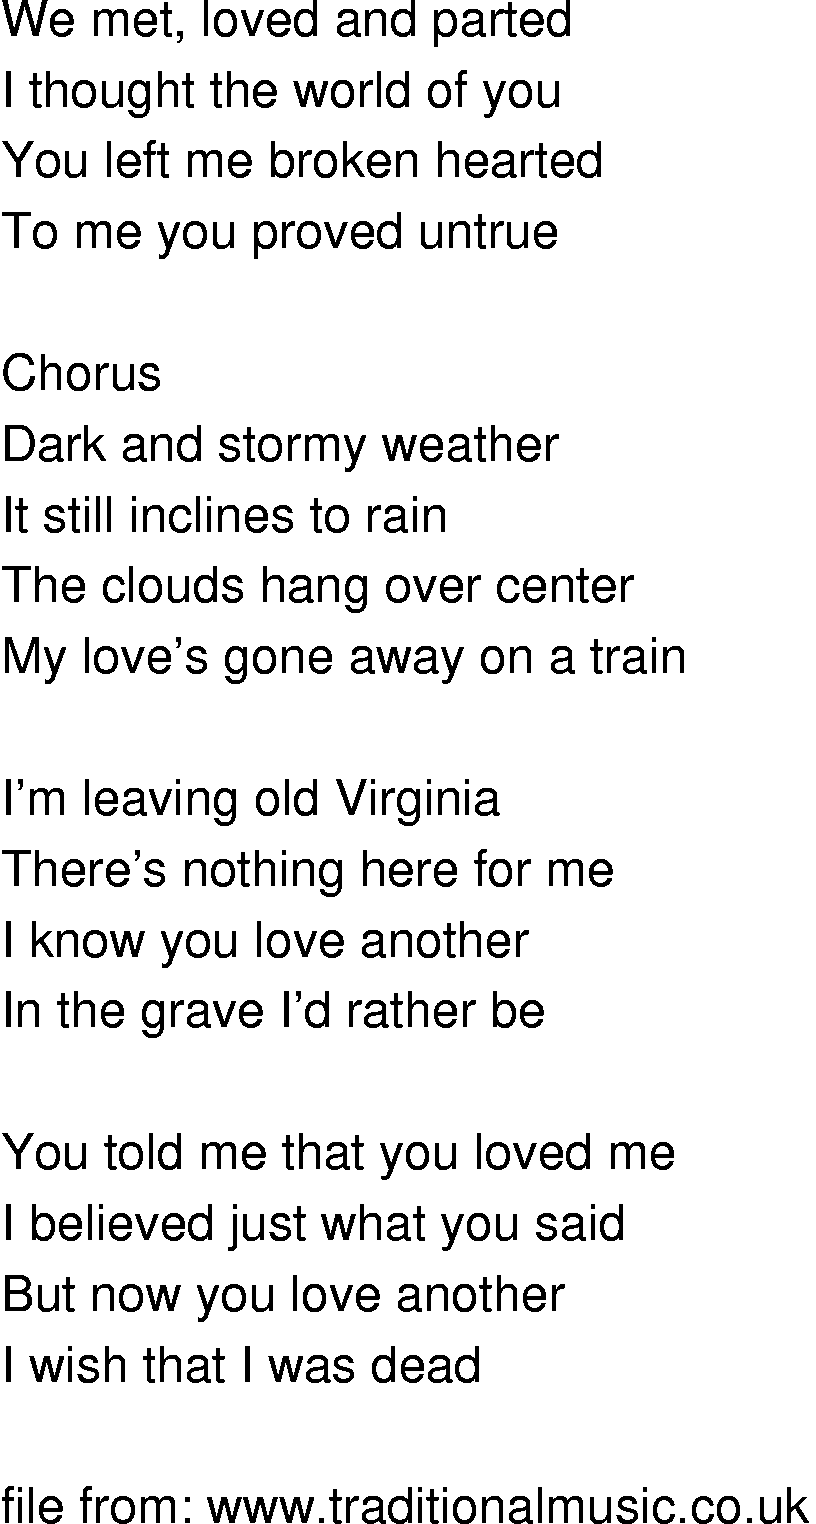 Old-Time Song Lyrics - Dark And Stormy Weather